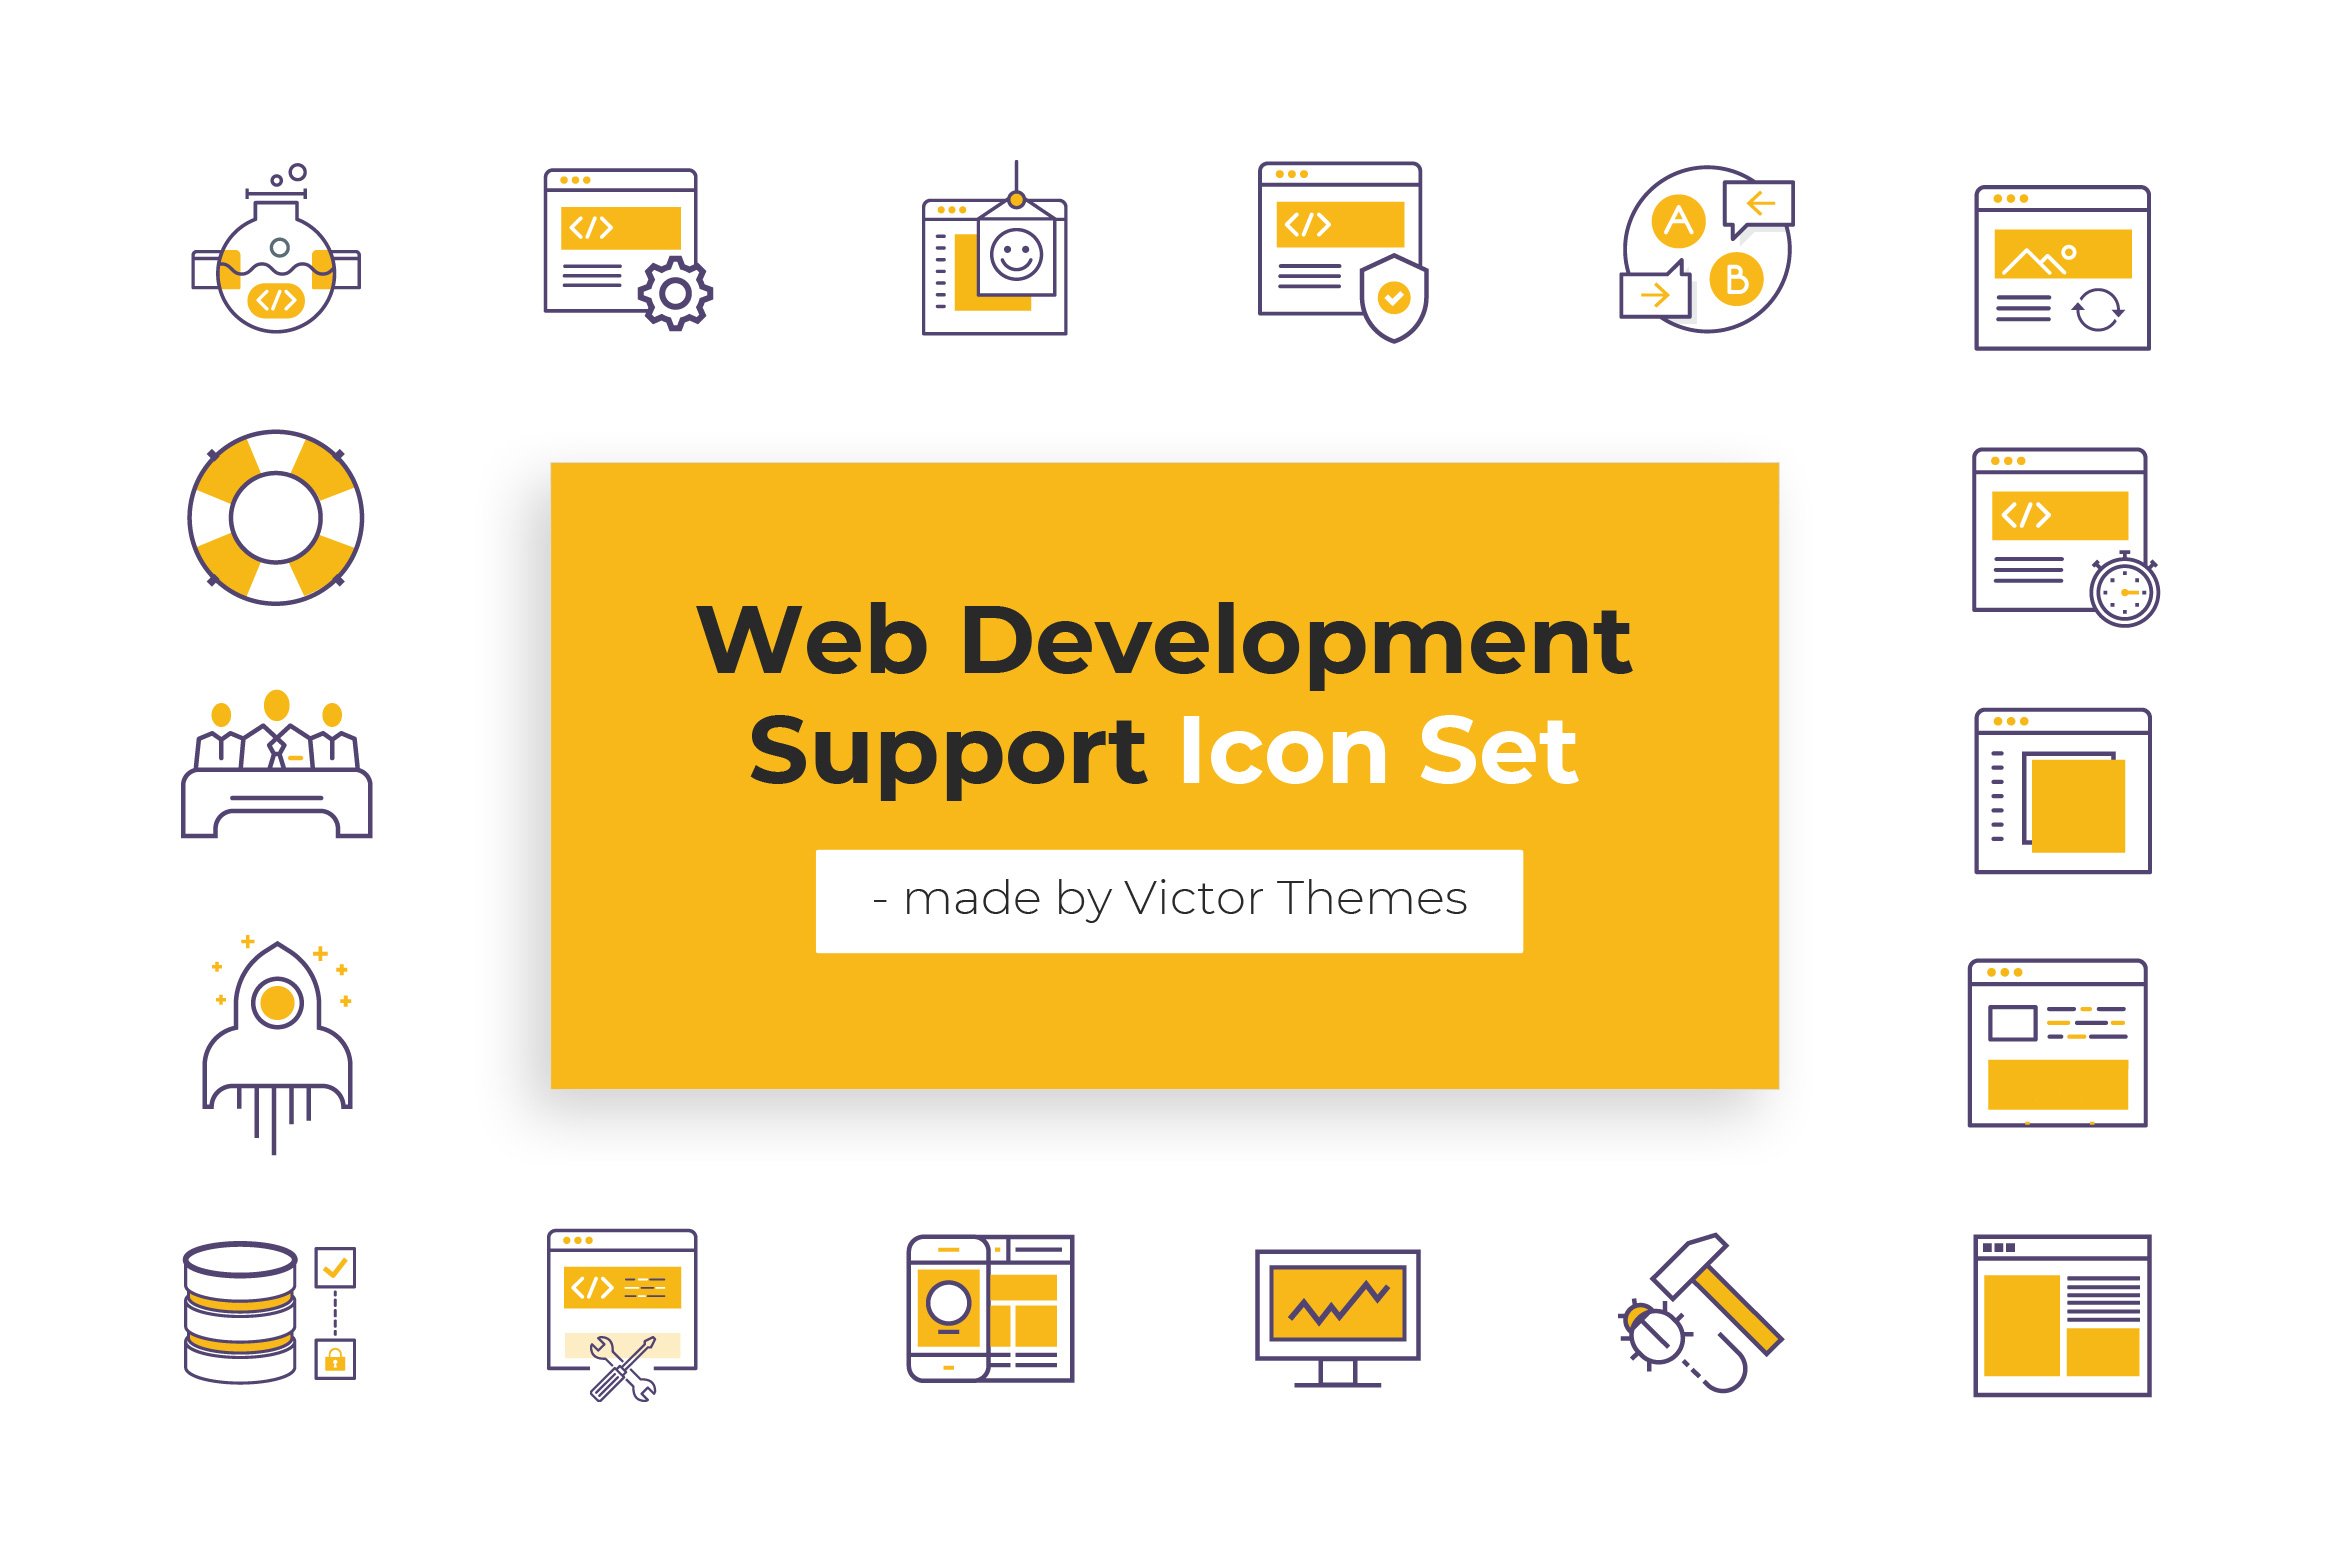 Web Development Support Icons